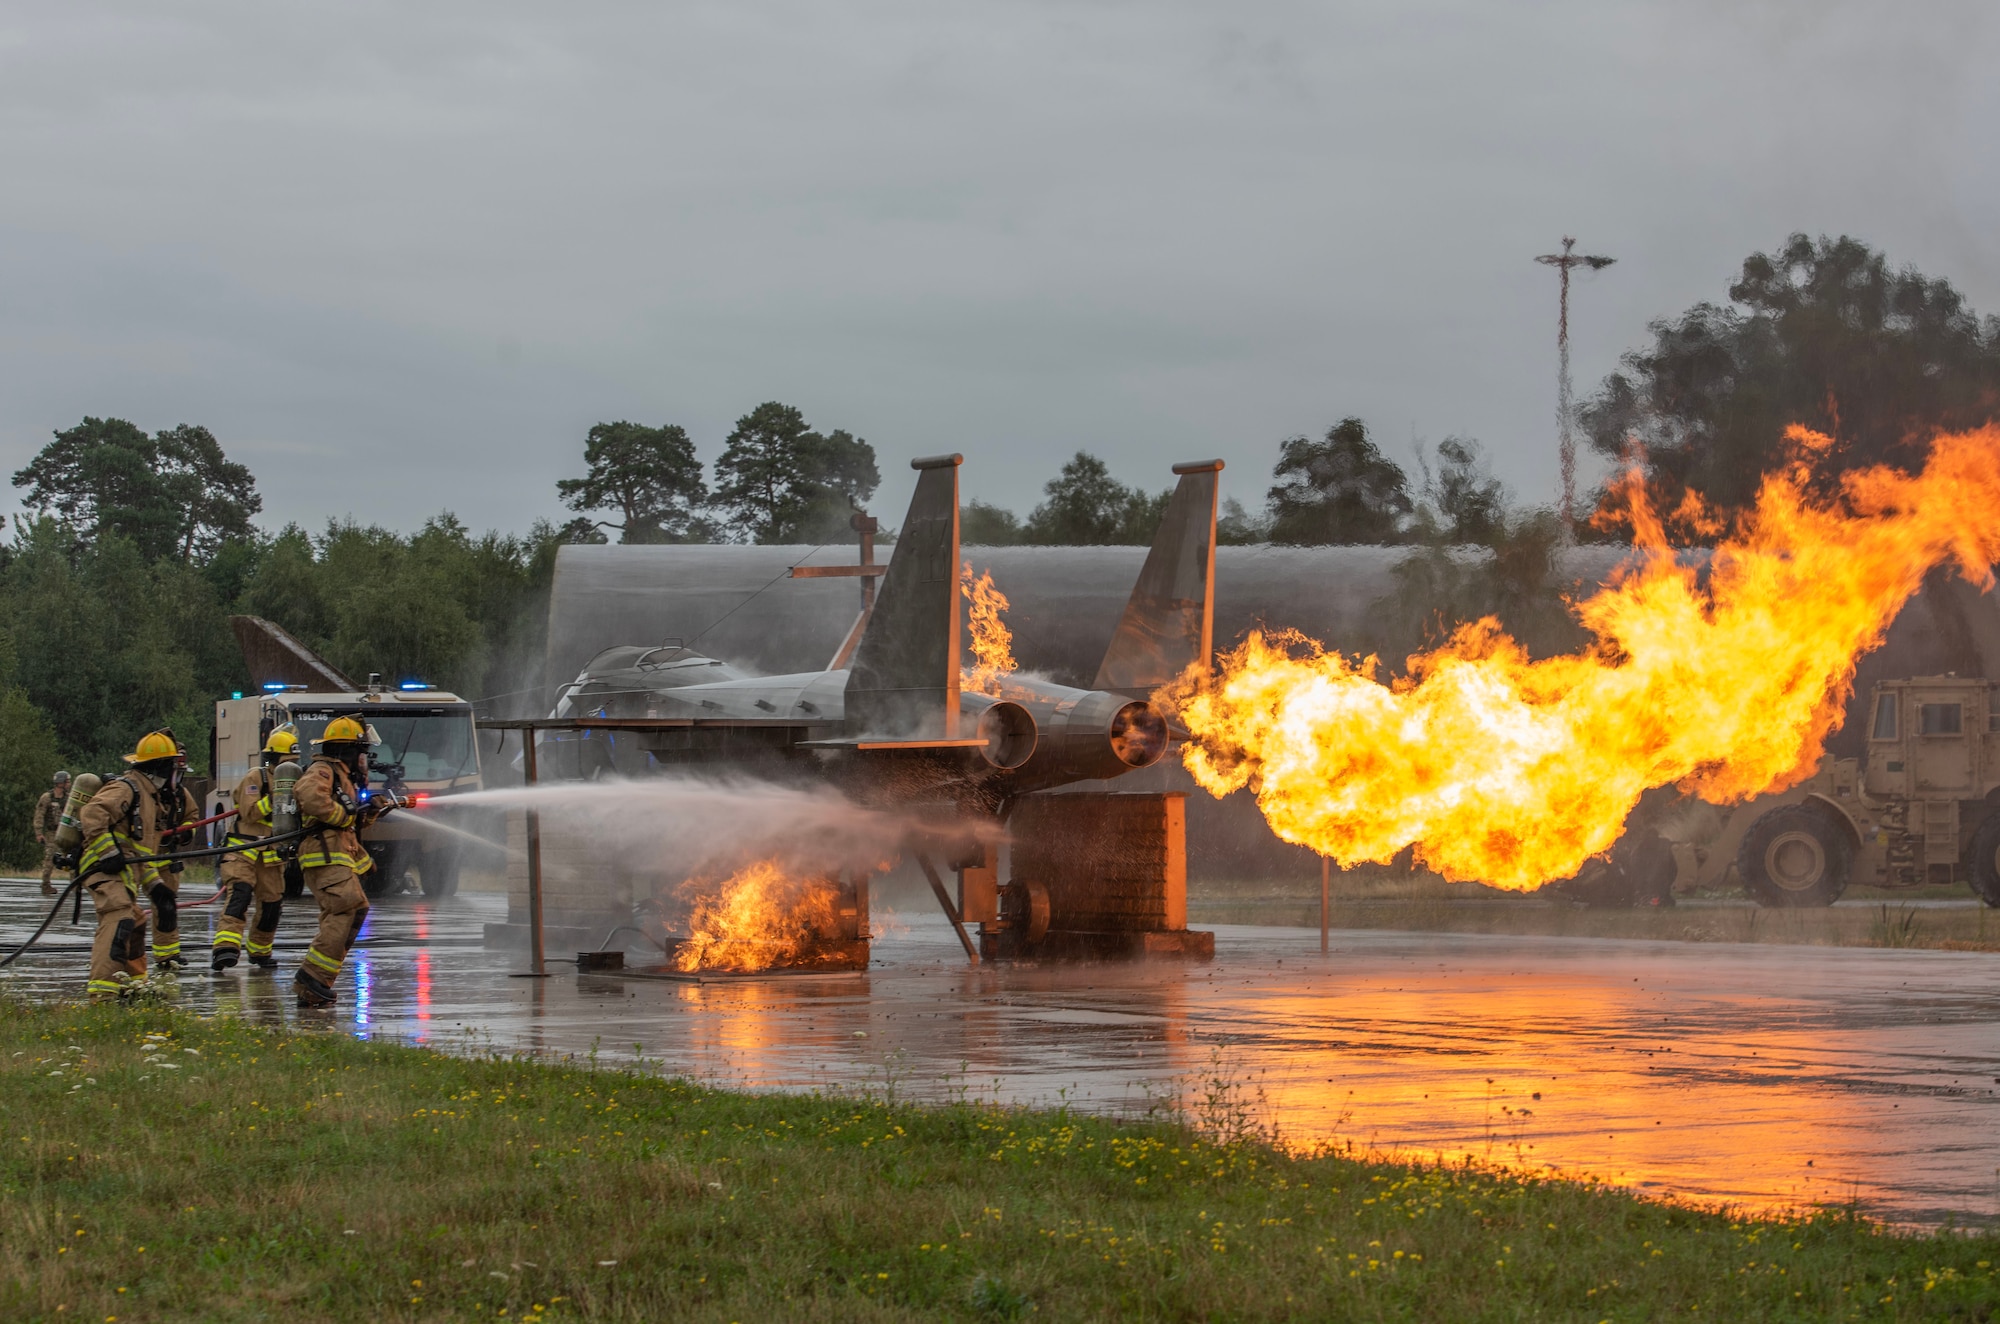 Firefighters use a hose to put out a controlled fire on an F-15 aircraft replica